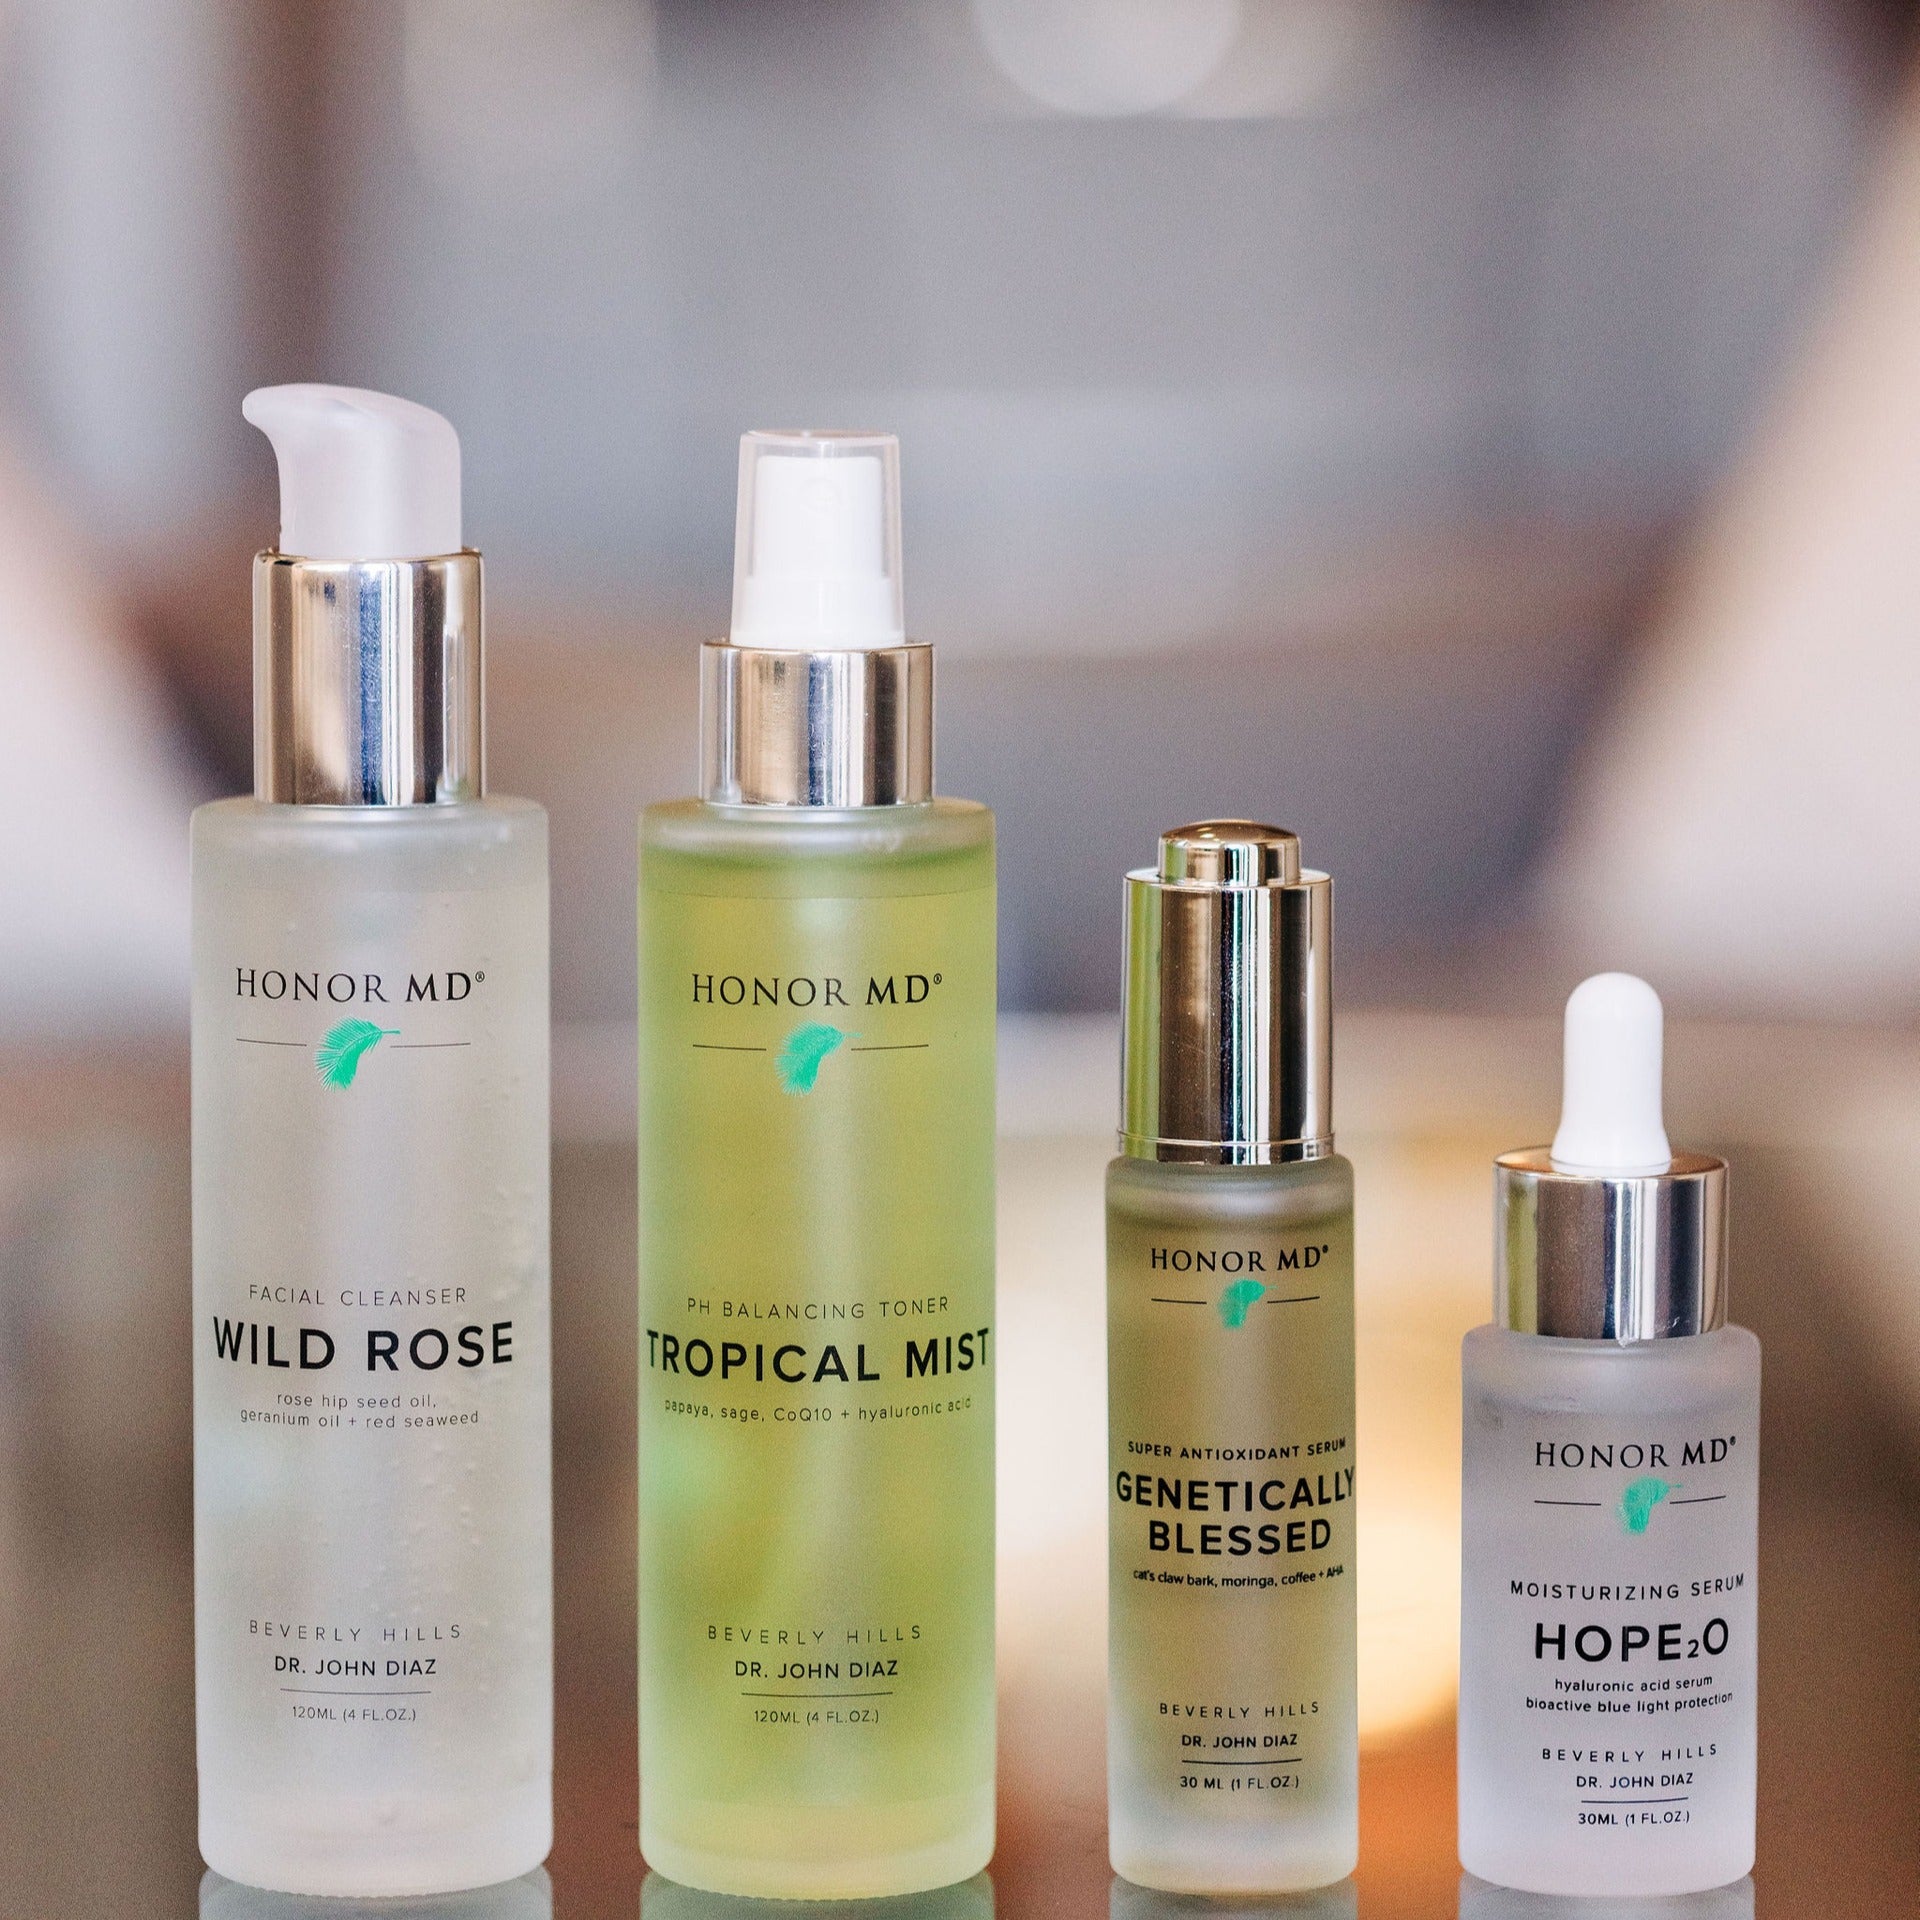 My Clean Skincare Formula for Achieving Flawless Skin